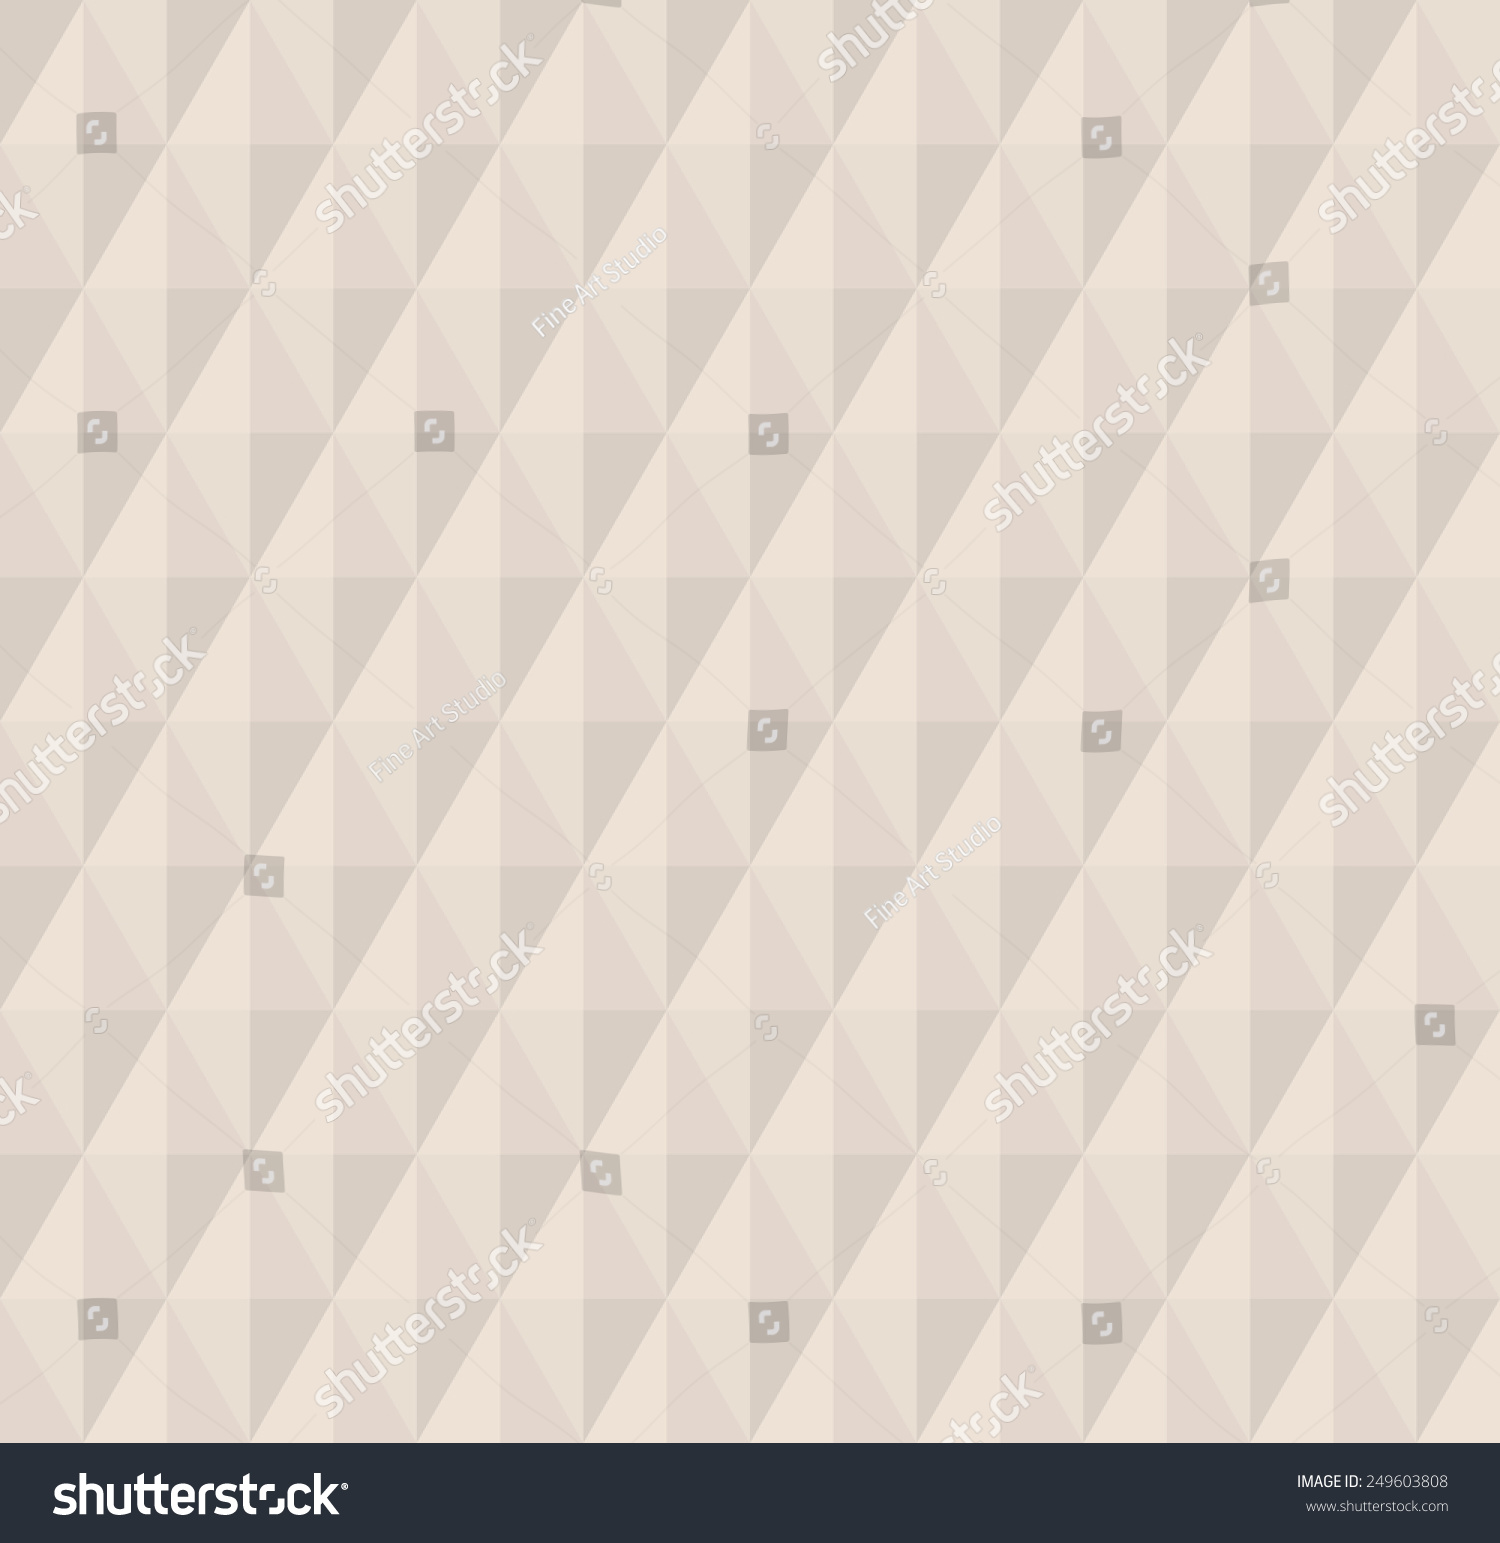 Geometric Fine Abstract Pattern With Pastel Colors. Seamless Modern ...